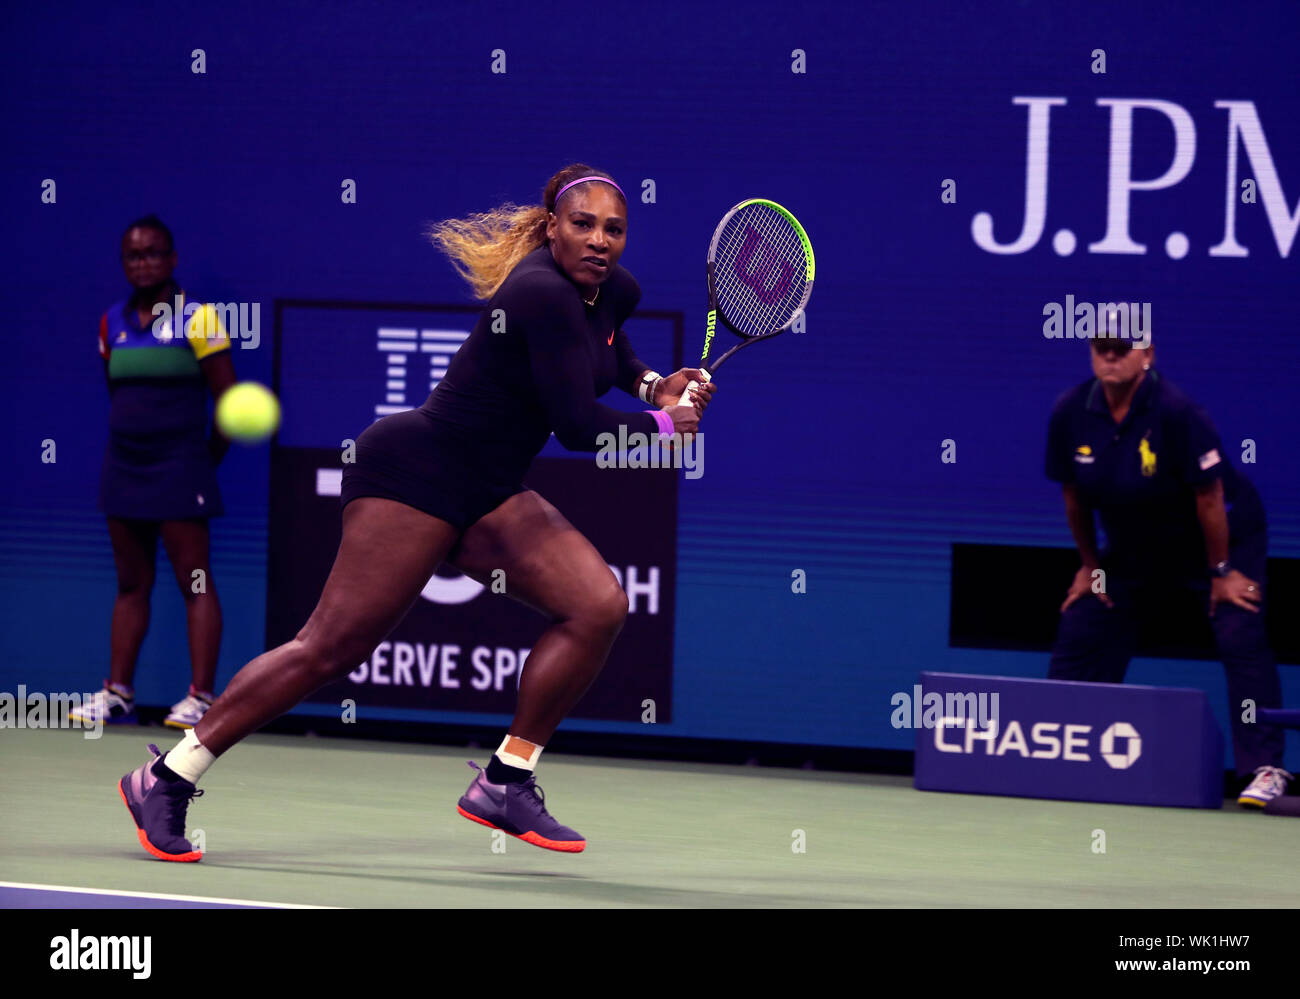 Flushing Meadows, New York, United States - 3 September 2019. Serena Williams scrambles for a backhand to Wang Qiang of China during their quarter final match at the US Open in Flushing Meadows, New York.   Williams won the match to record her 100th US Open match victory. Credit: Adam Stoltman/Alamy Live News Stock Photo